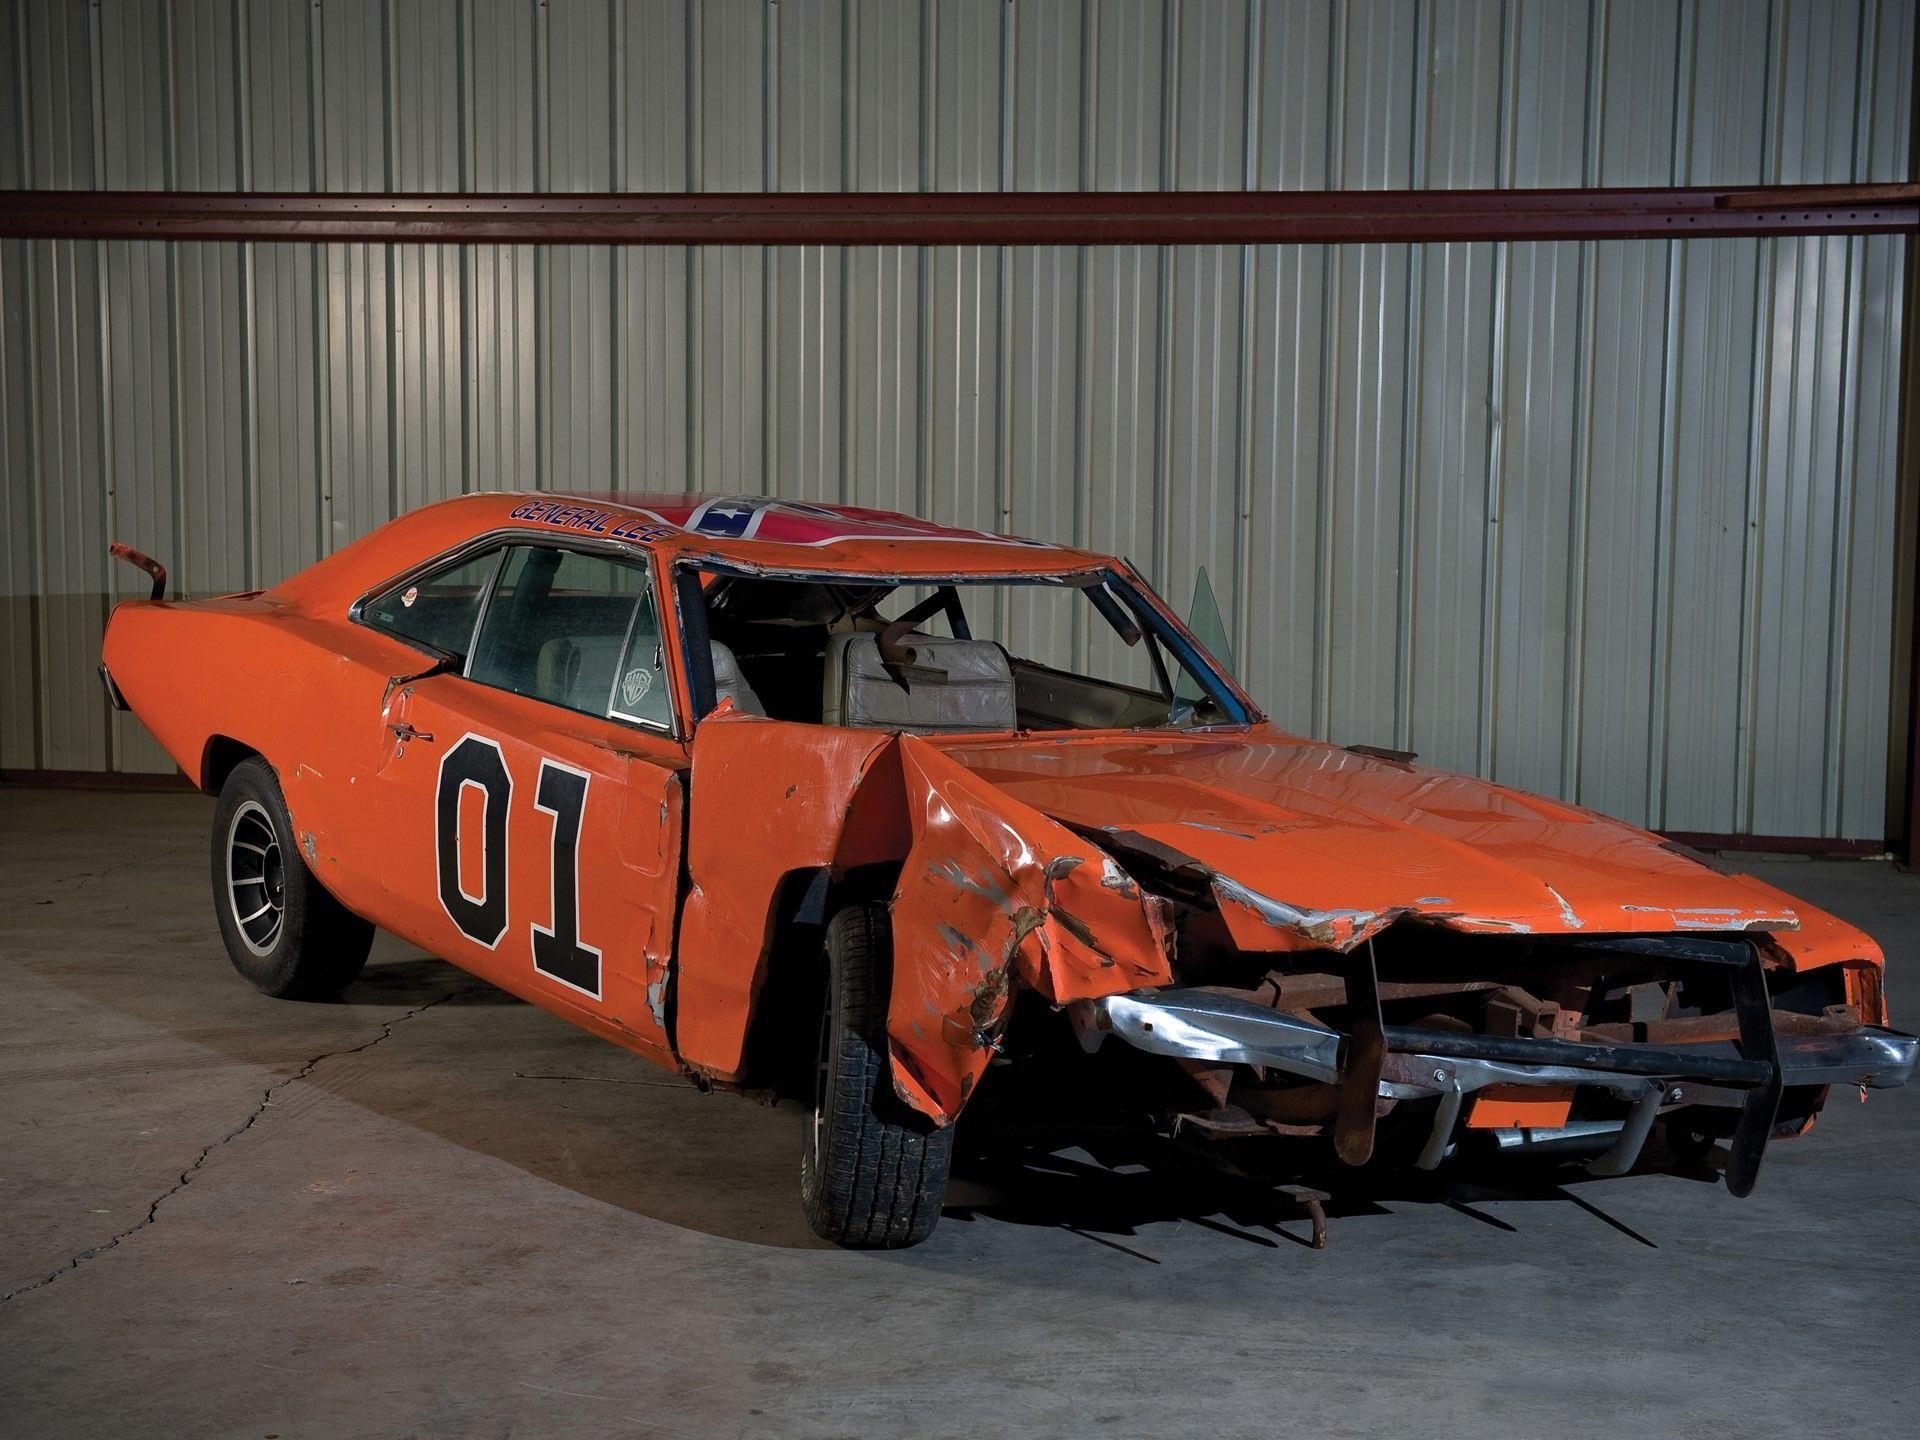 Artist Gives The General Lee A Boost